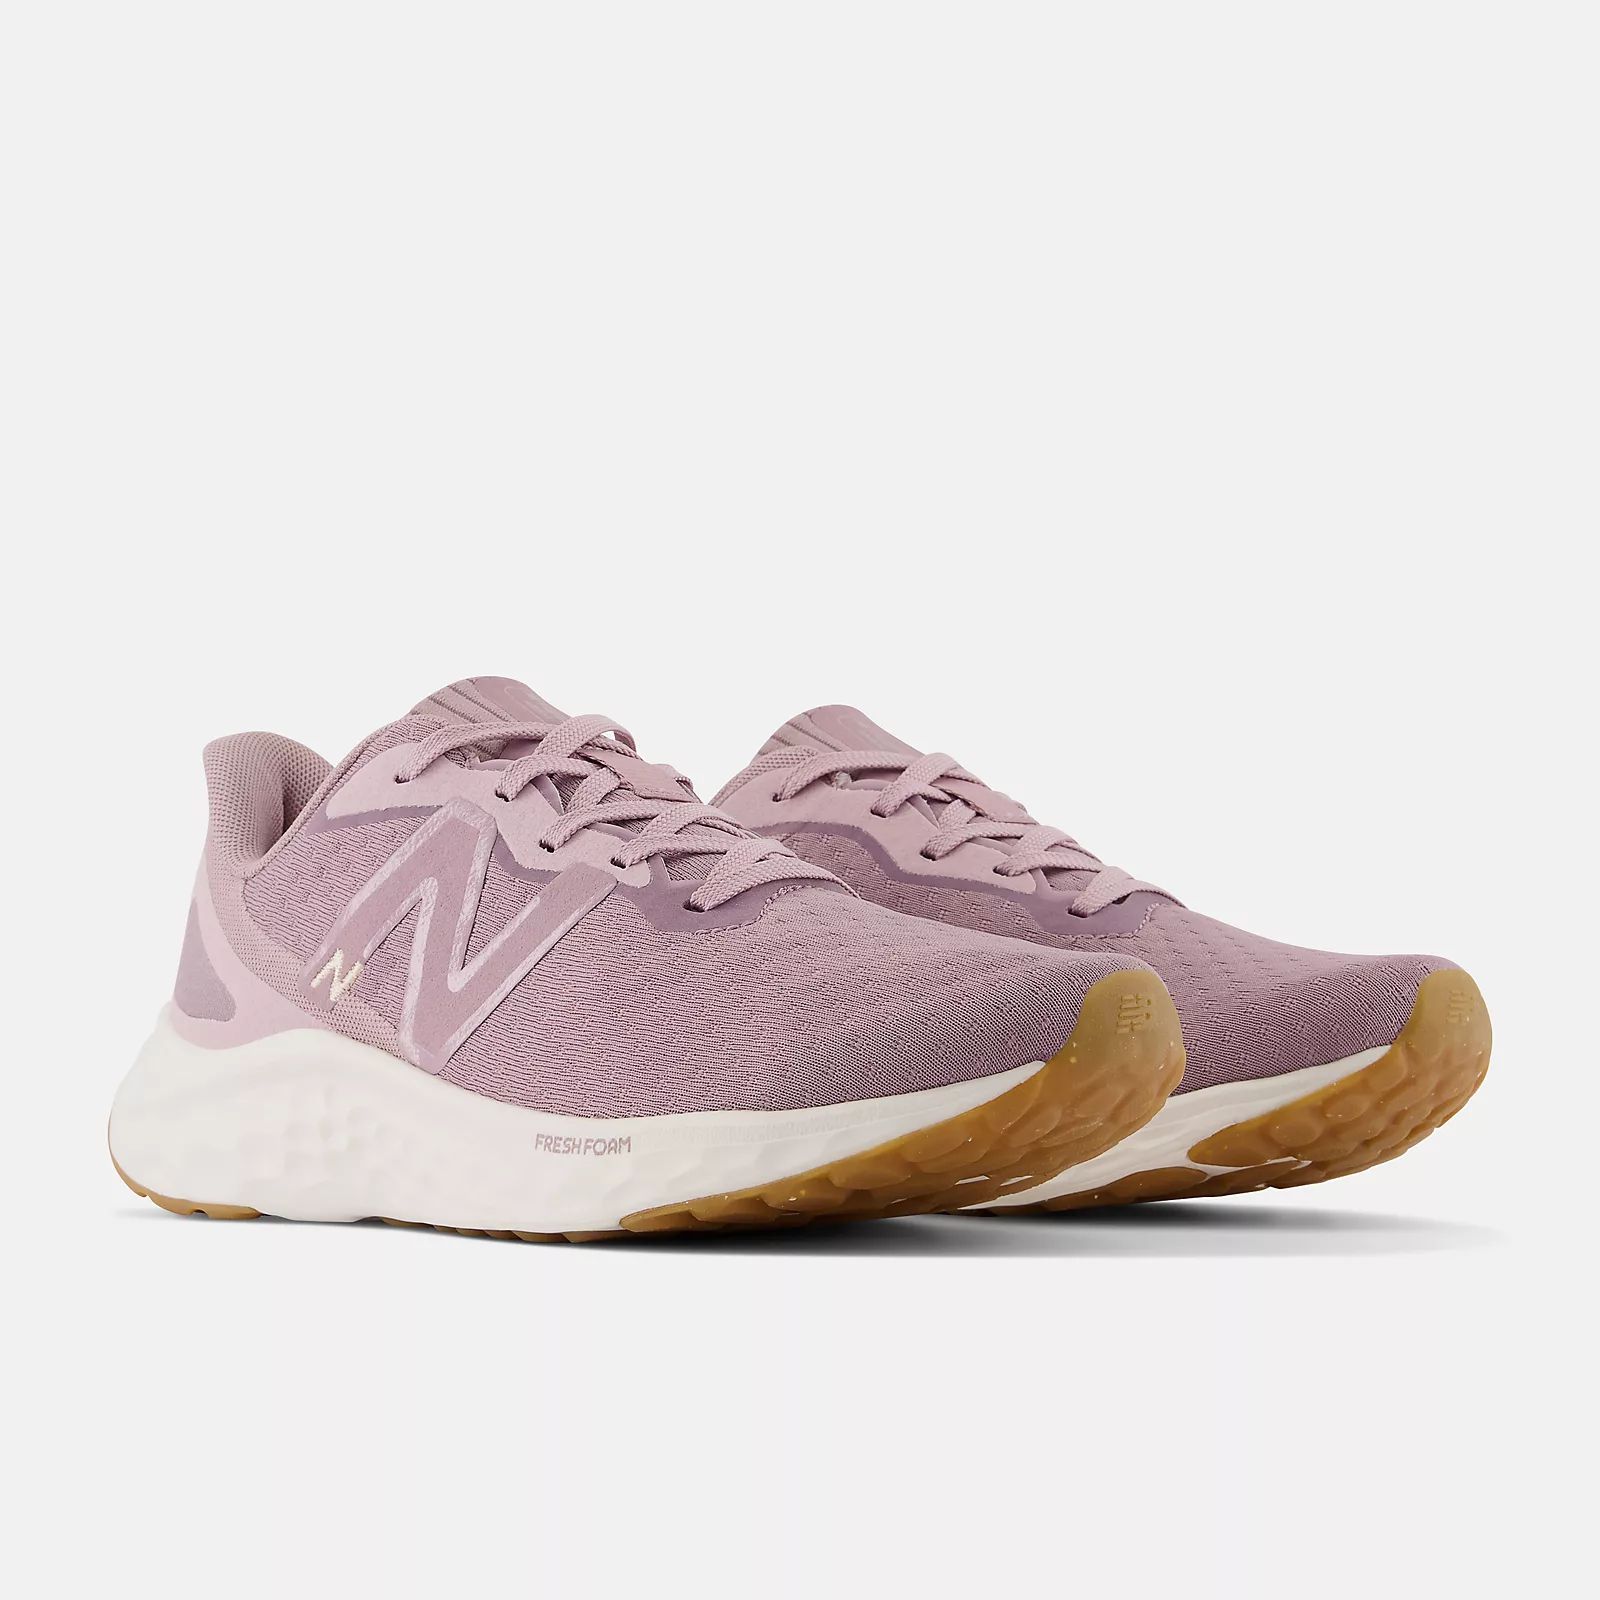 Lilac Chalk with Violet Shadow and Light Gold Metallic | New Balance Athletics, Inc.